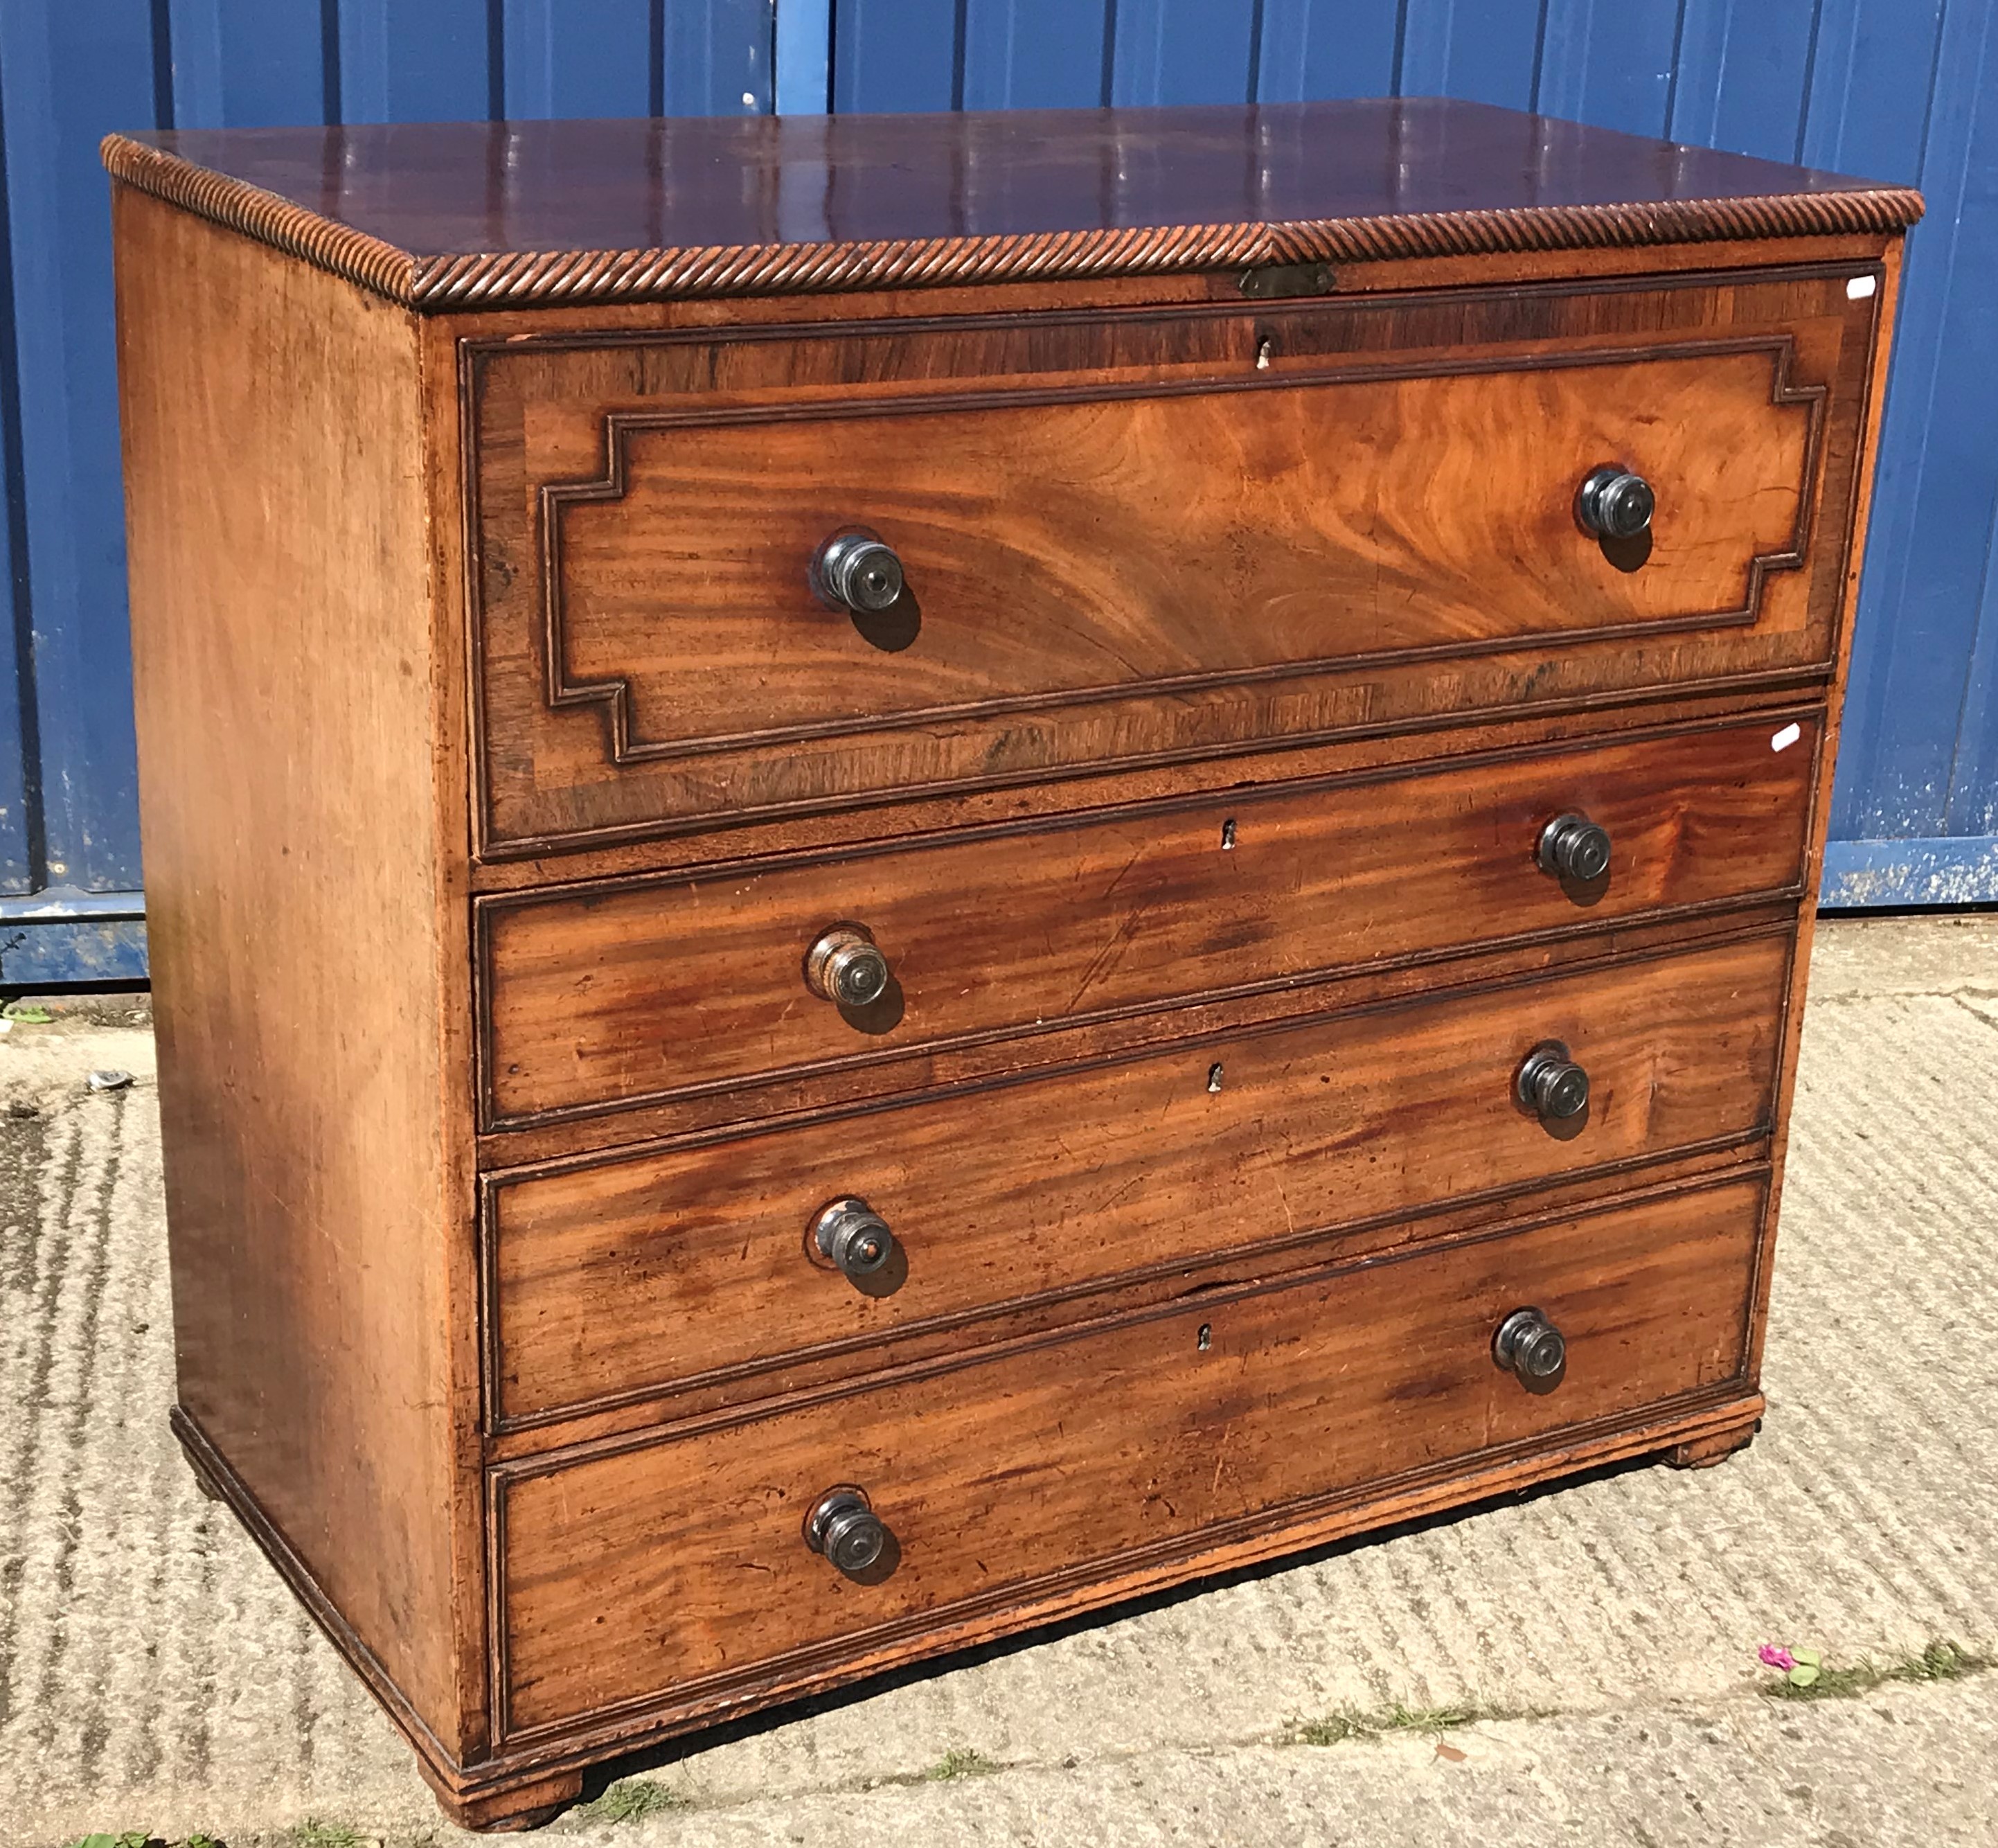 An early 19th Century mahogany and rosewood cross banded secretaire chest, the top with ropework - Image 3 of 3